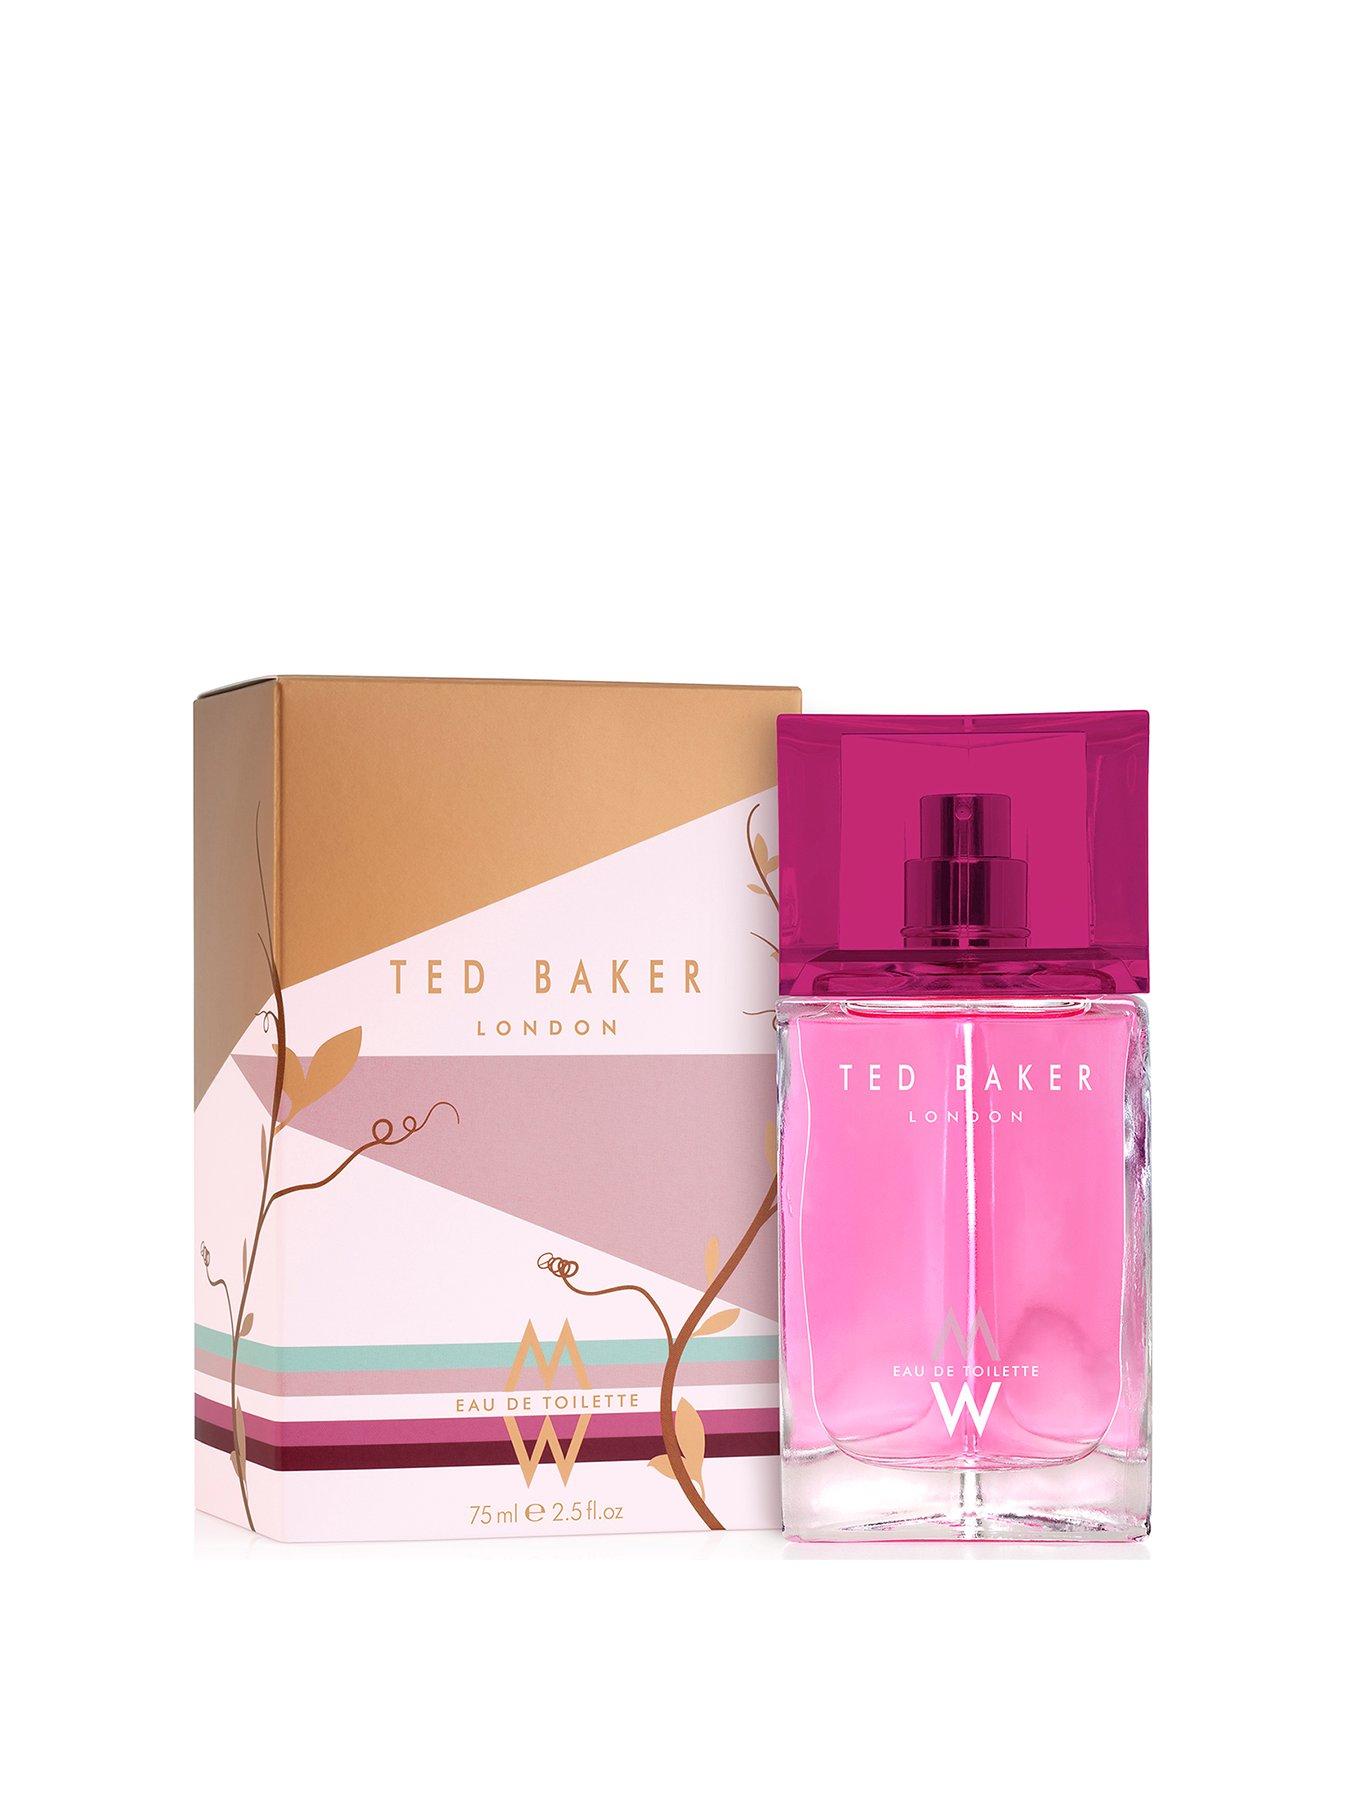 ted baker london bags price in pakistan